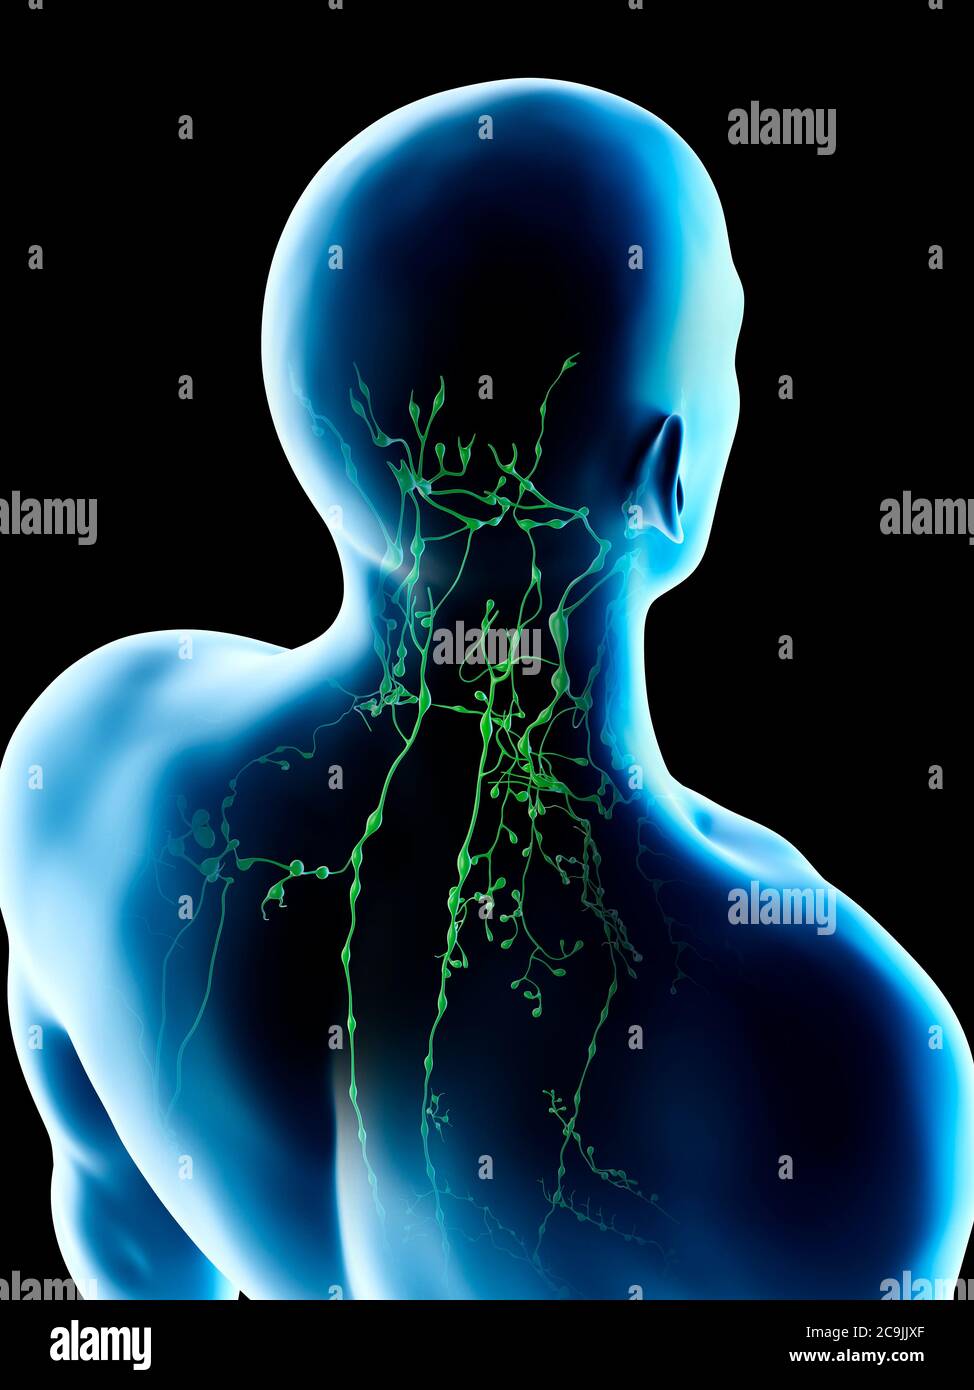 Lymph Nodes Of The Back And Neck Computer Illustration Stock Photo Alamy